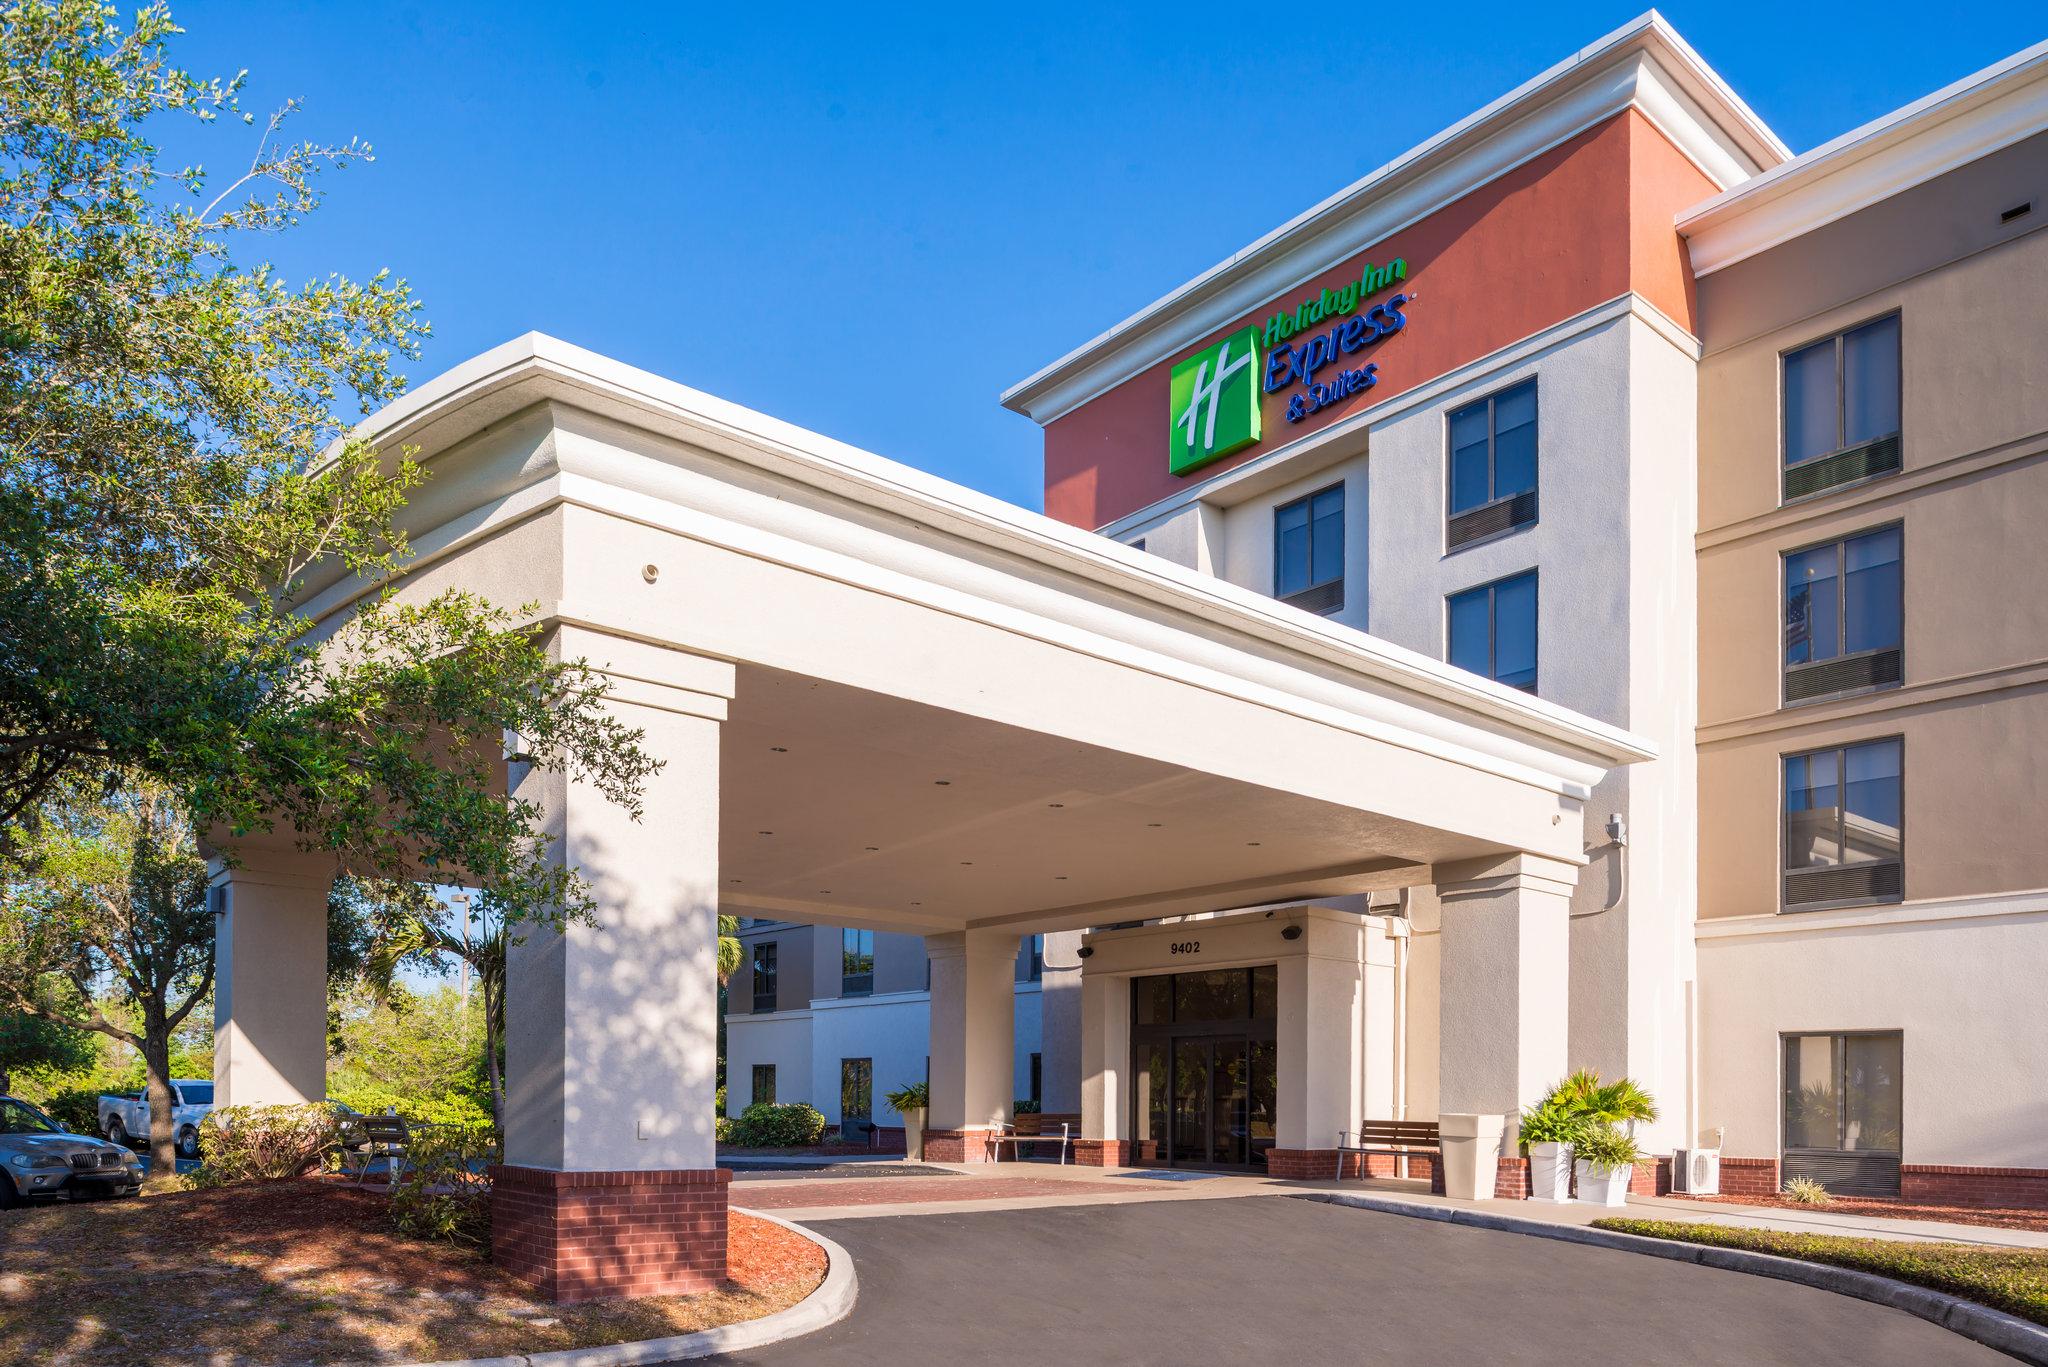 Holiday Inn Express & Suites Tampa-Anderson Rd/Veterans Exp in Tampa, FL